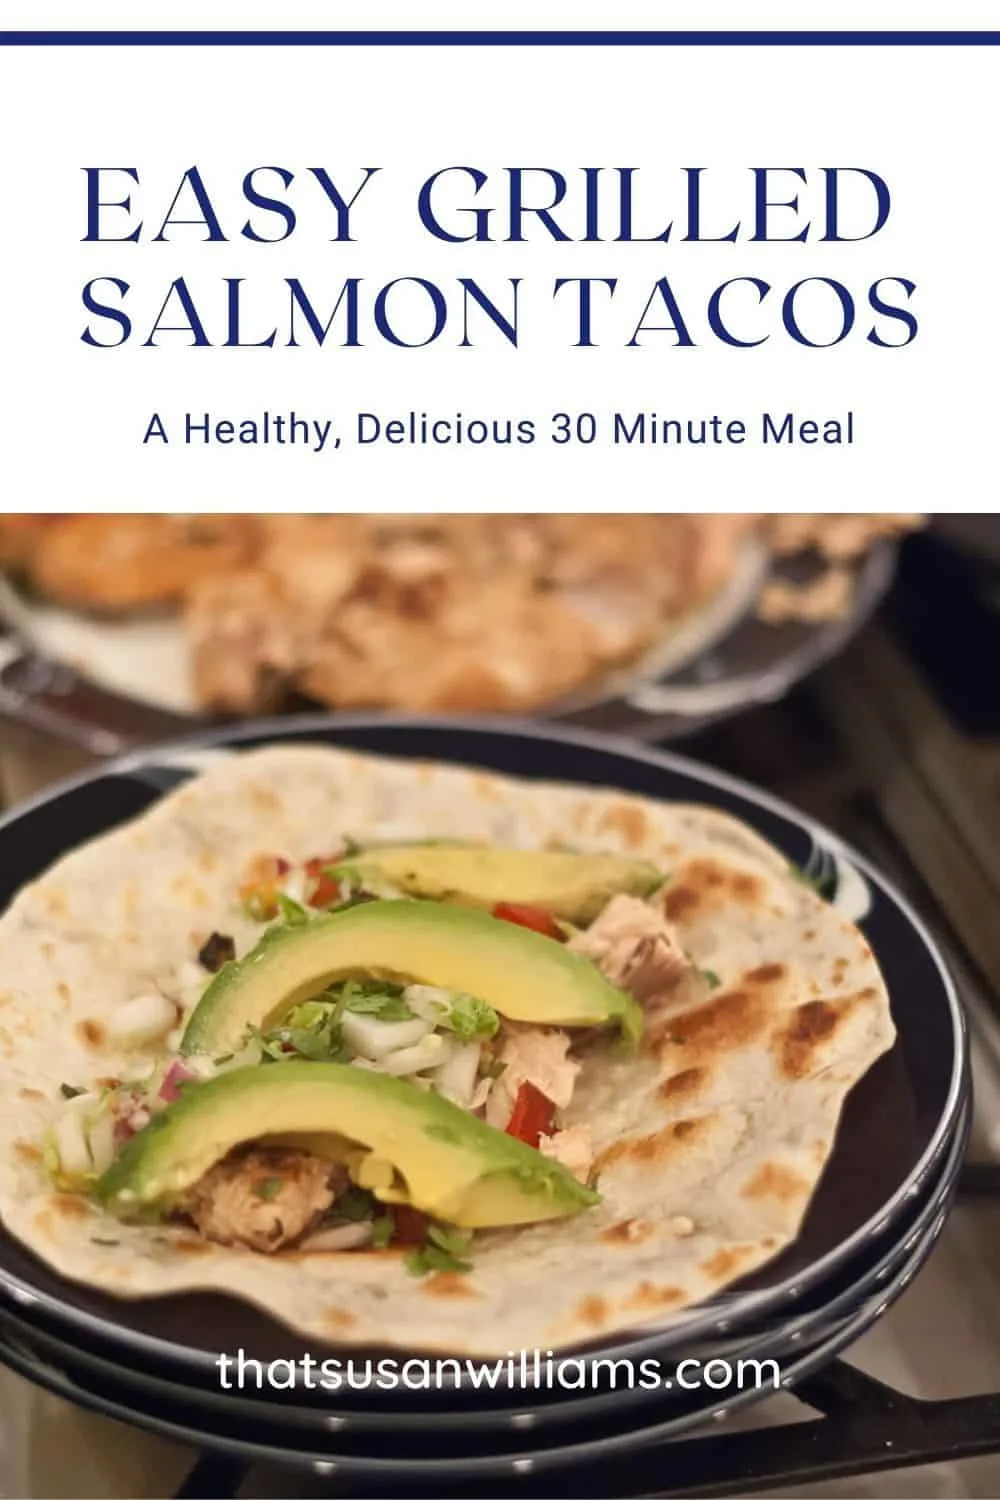 Easy Grilled Salmon Tacos